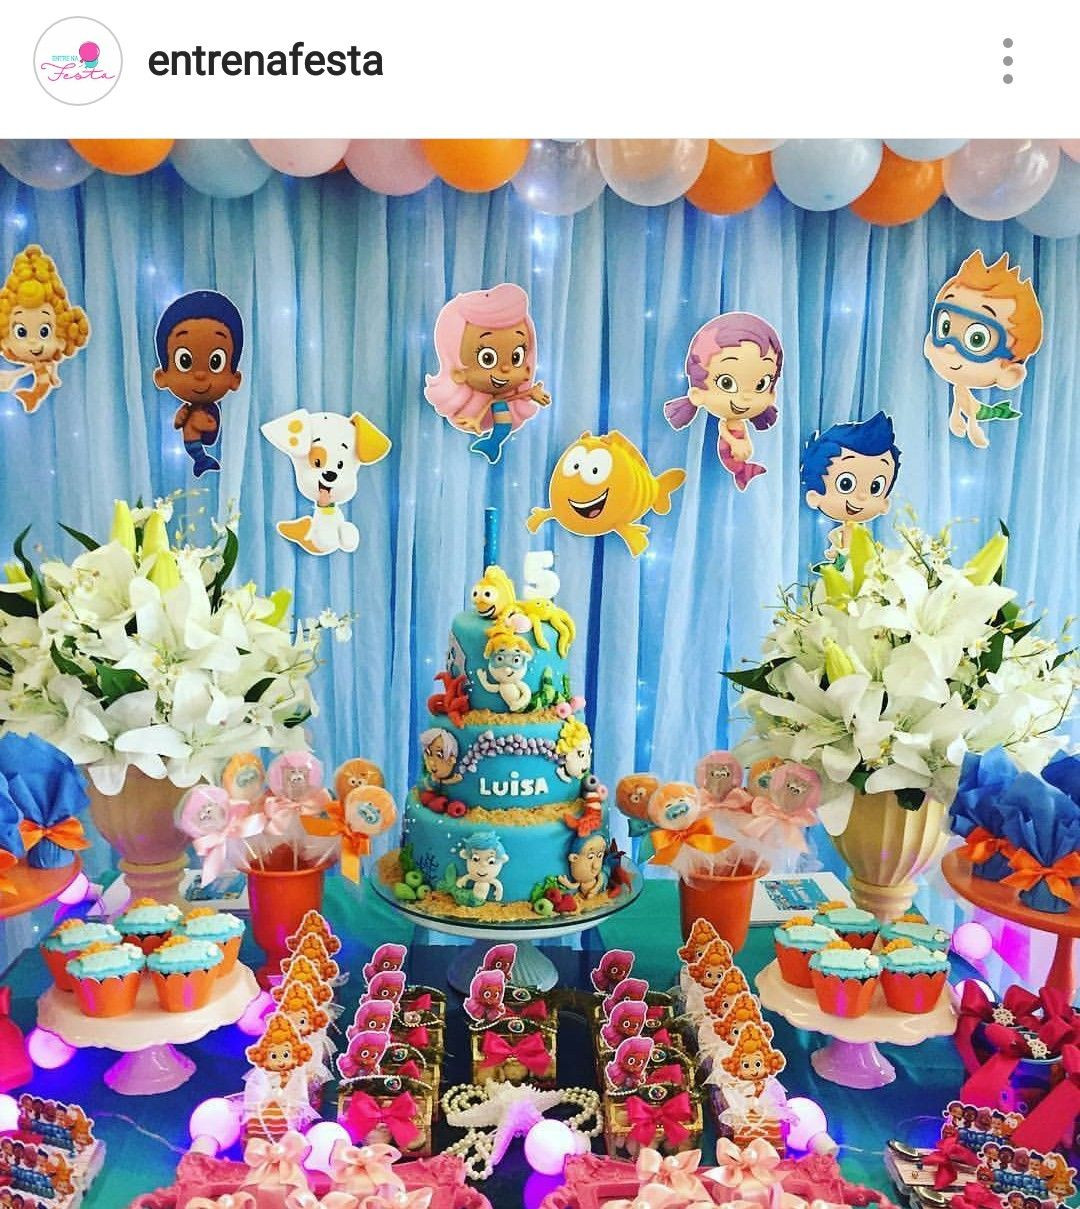 Bubble Guppies Birthday Party Supplies
 Bubble Guppies Birthday Party Dessert Table and Decor